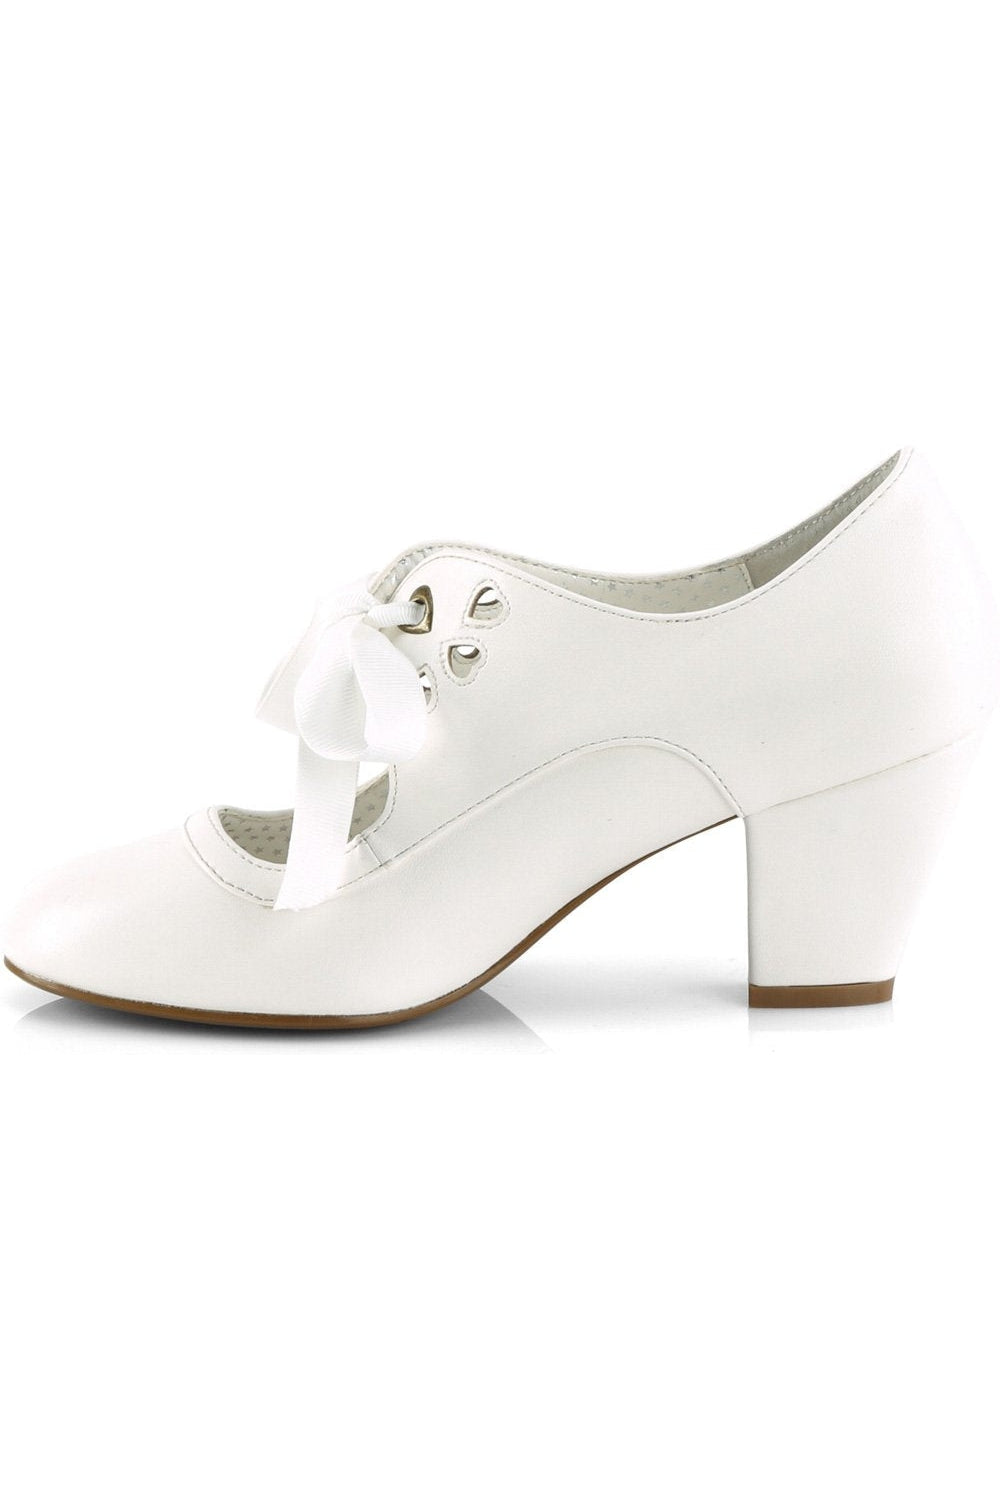 WIGGLE-32 Pump | White Patent-Pumps-Pin Up Couture-SEXYSHOES.COM